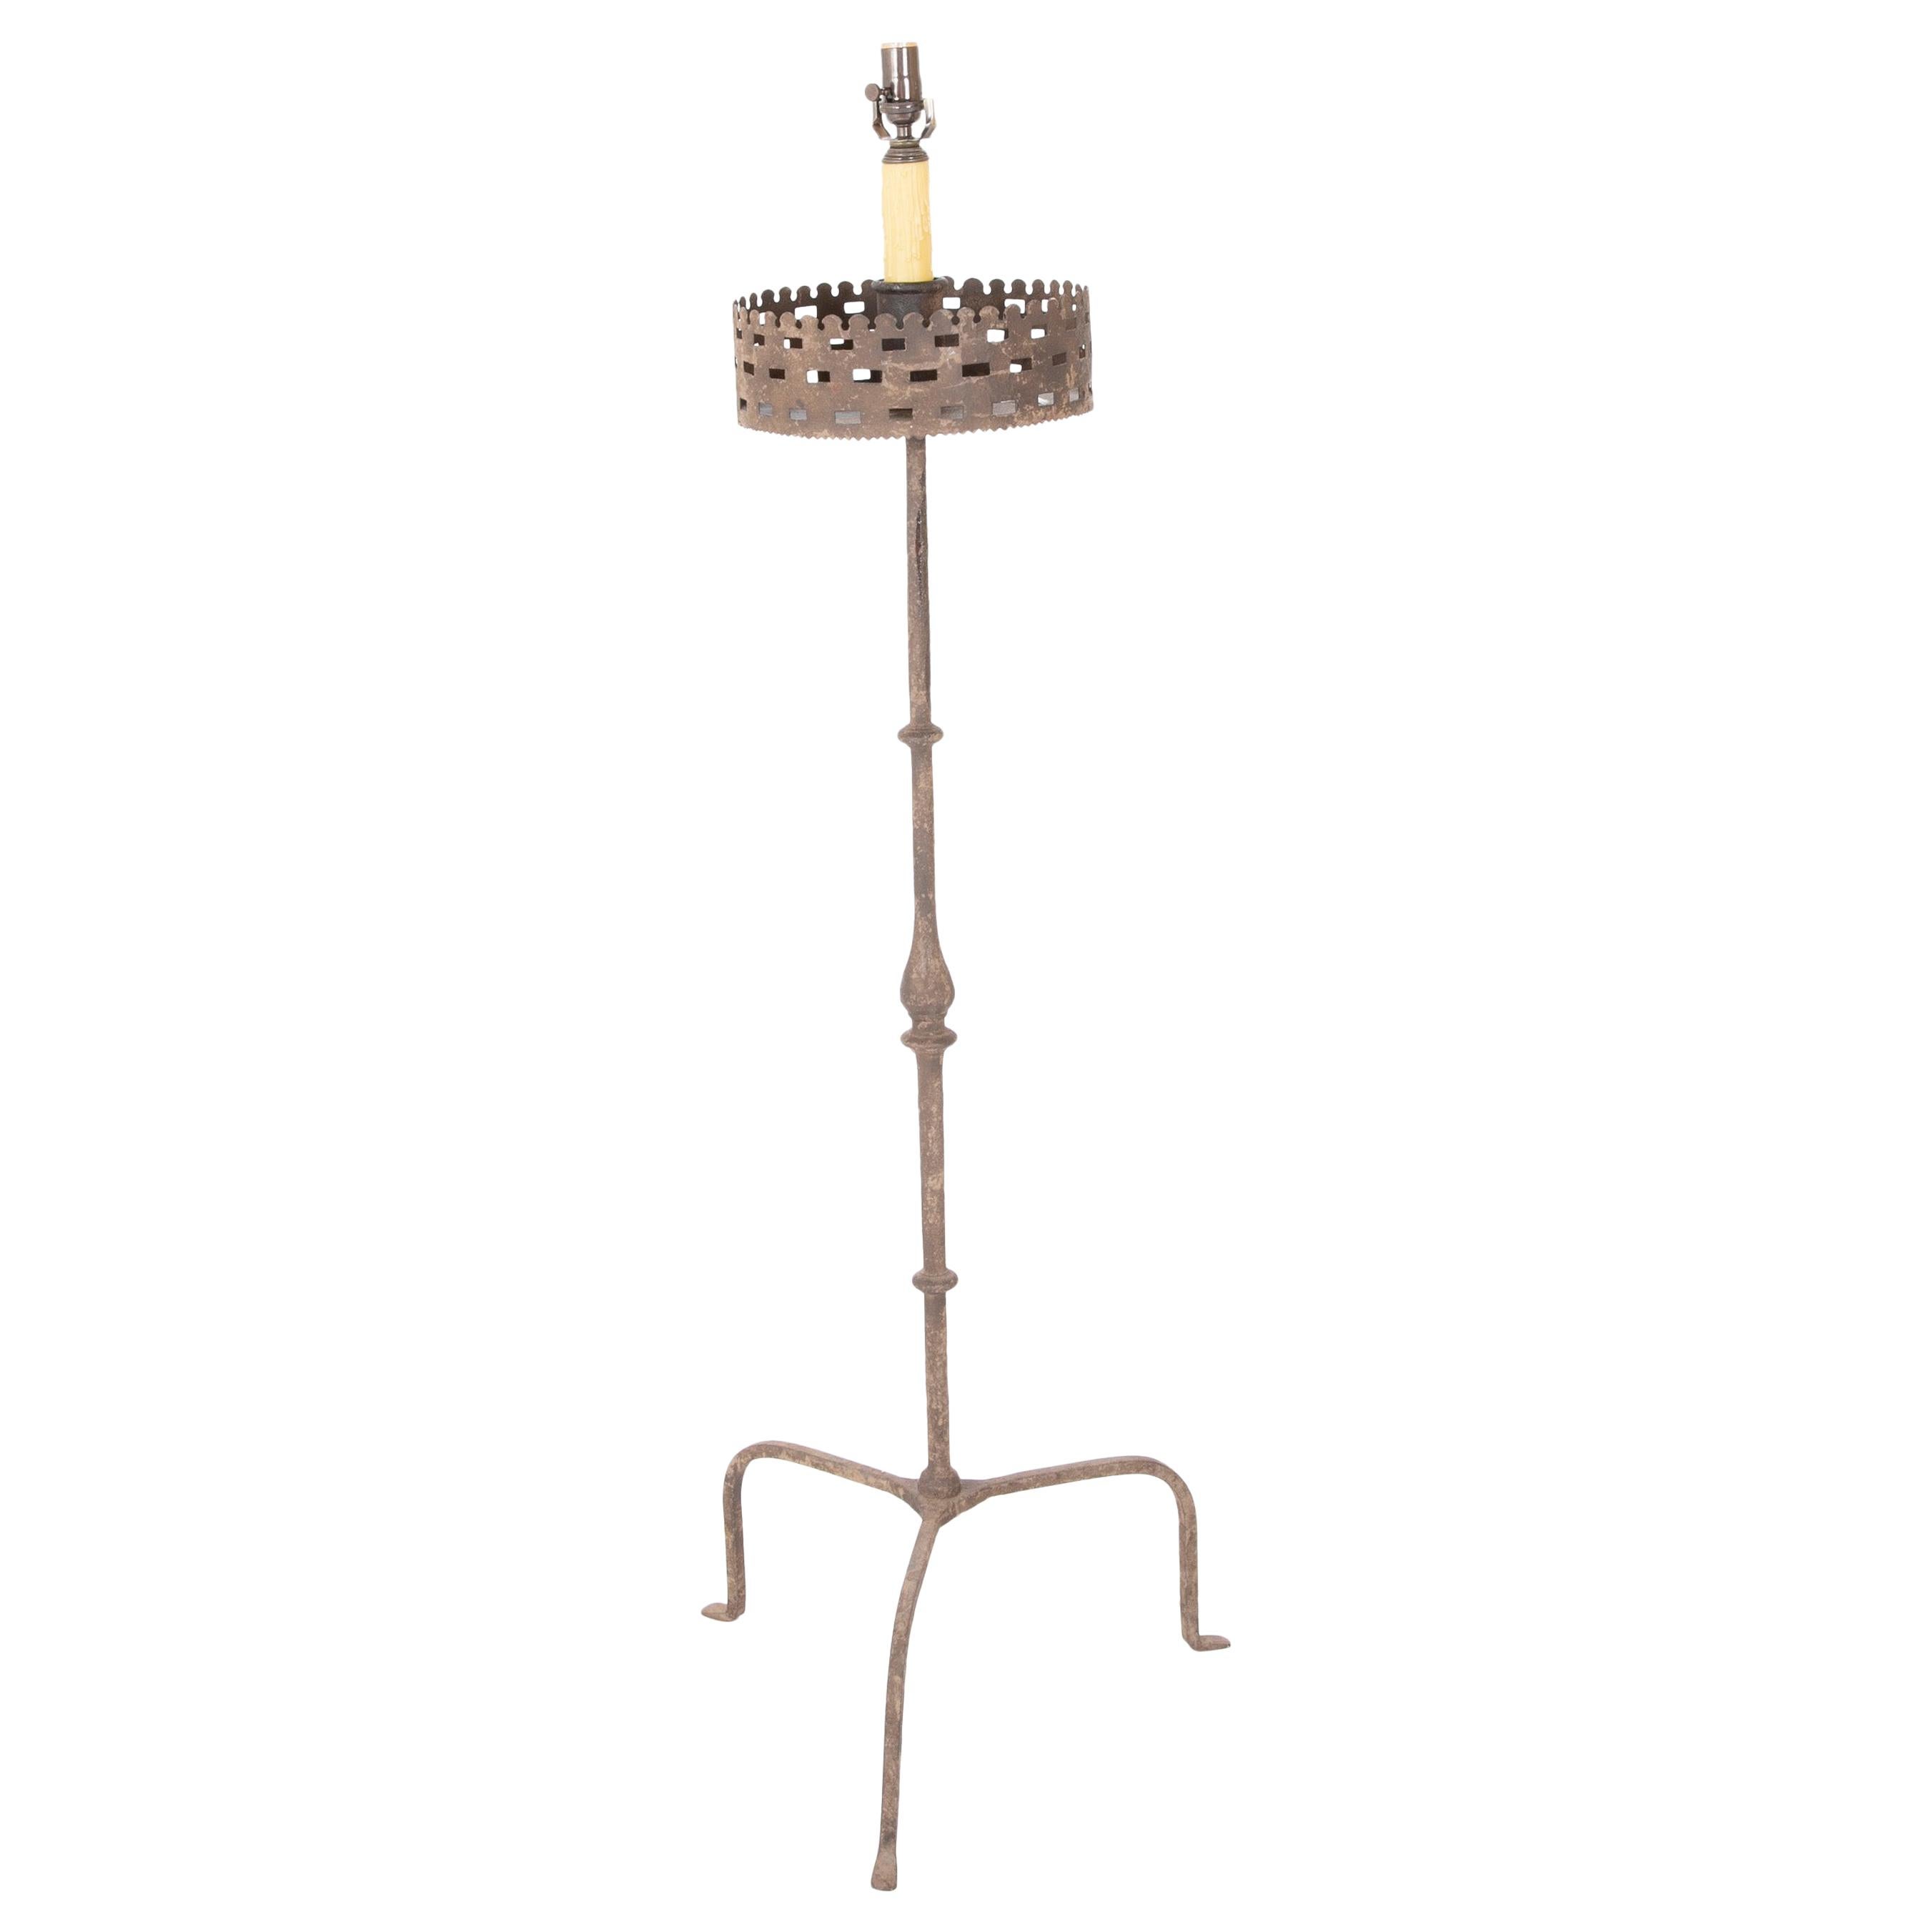 Handwrought Iron Pricket Stick Now as Lamp with Crenulated Bobeche For Sale